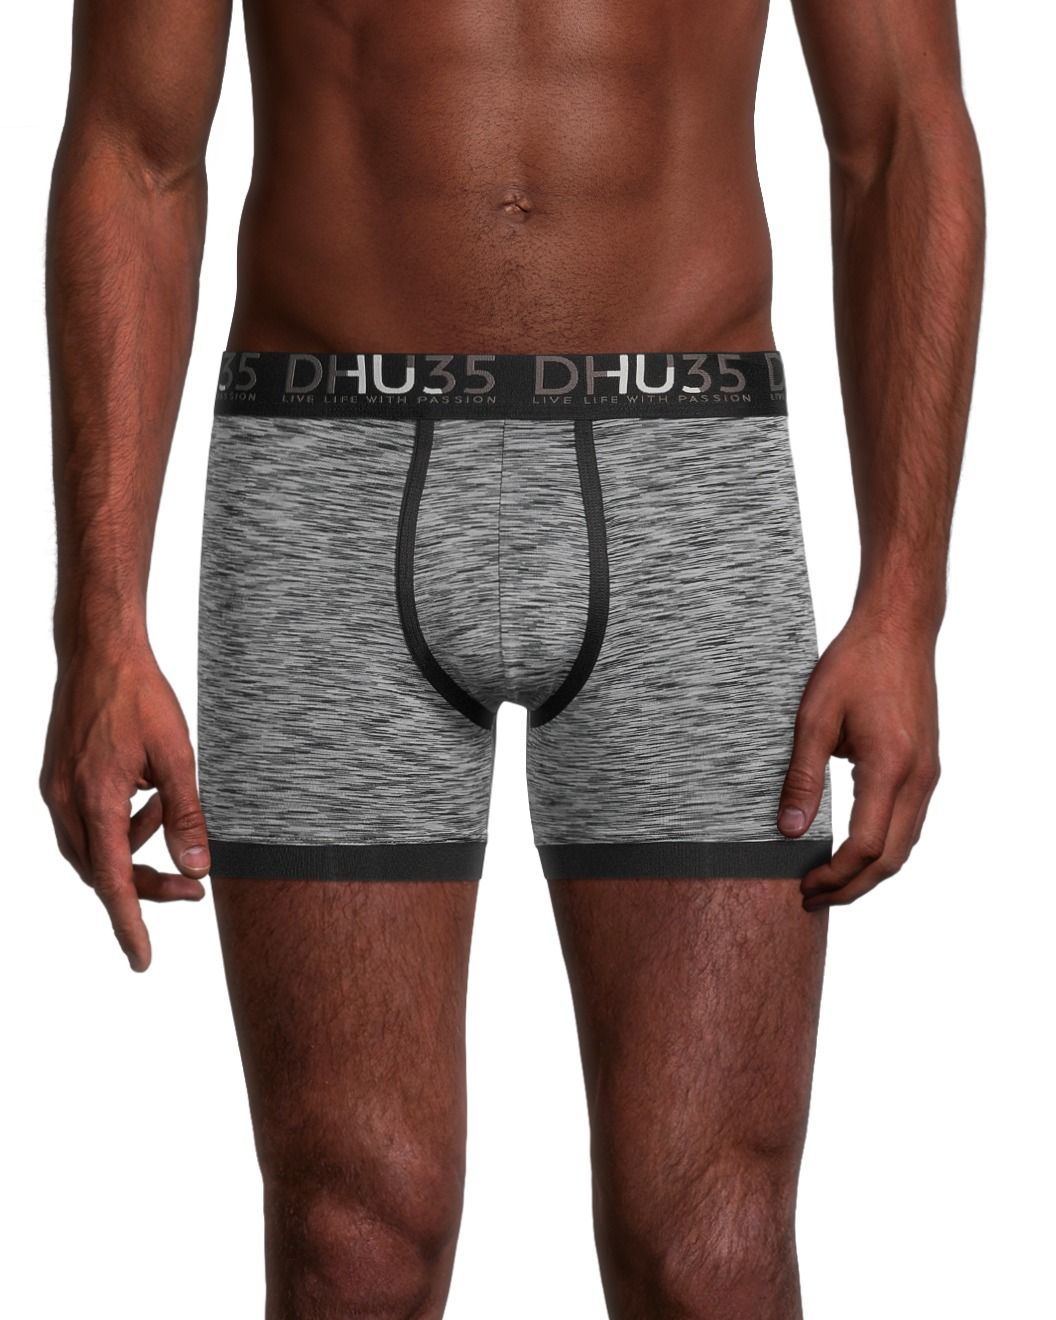 https://media-www.marks.com/product/marks-work-wearhouse/industrial-world/mens-underwear-and-loungewear/410034806330/denver-hayes-men-s-3-pack-microfibre-boxer-briefs-underwear-cdf6c962-ce8d-4eb4-8c00-5d16cca1a1f3-jpgrendition.jpg?imdensity=1&imwidth=1244&impolicy=mZoom